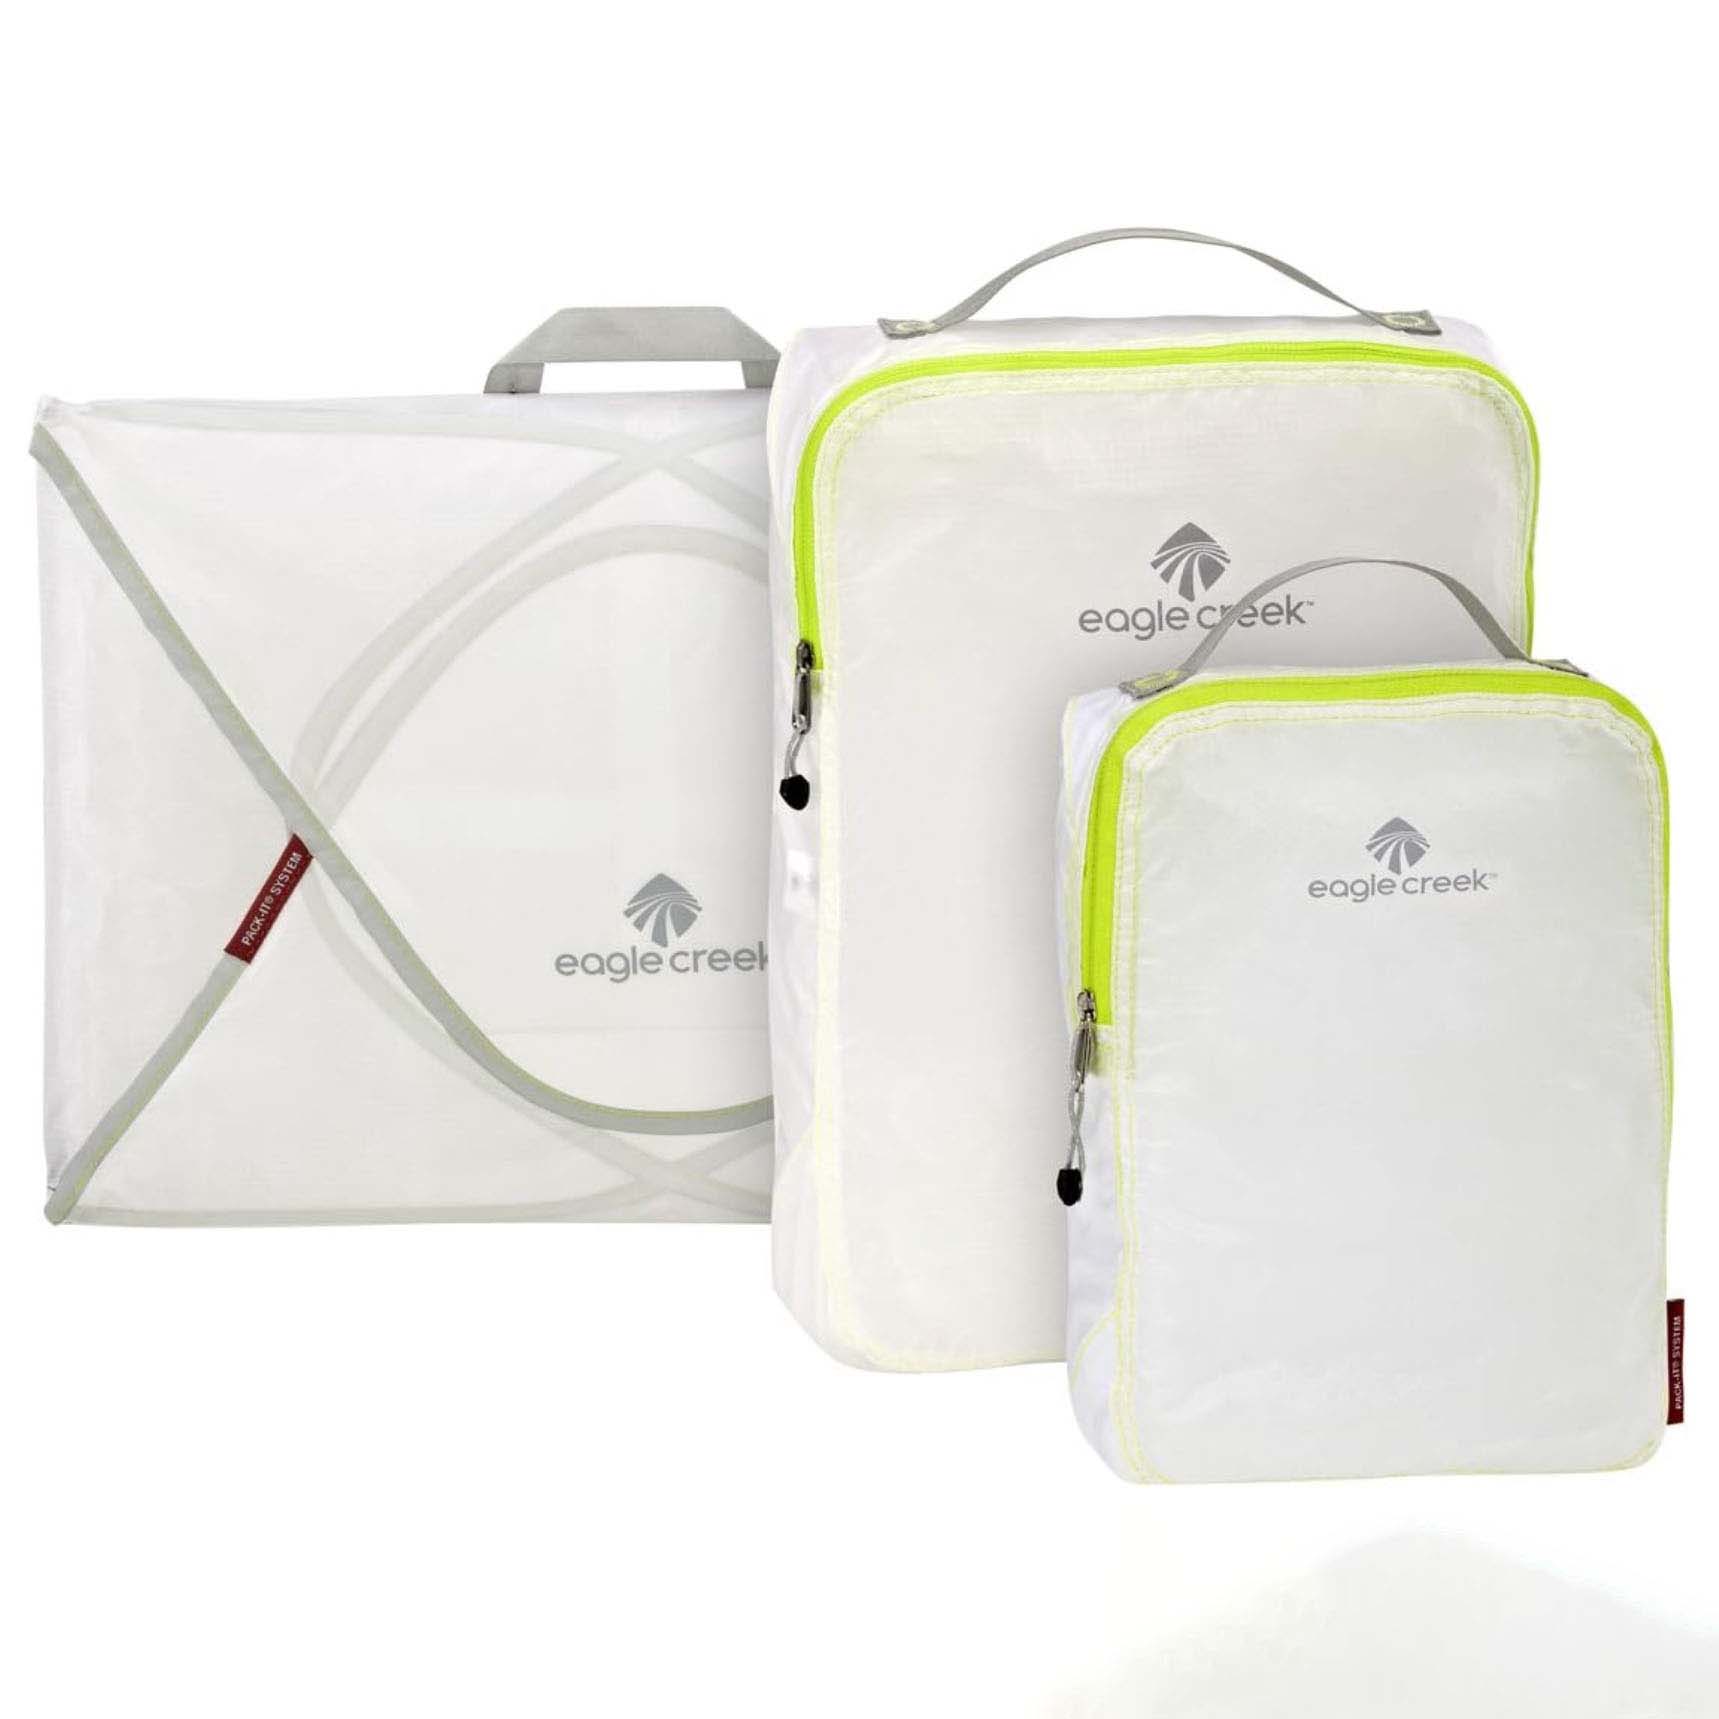 Set of 3 packing cubes in white